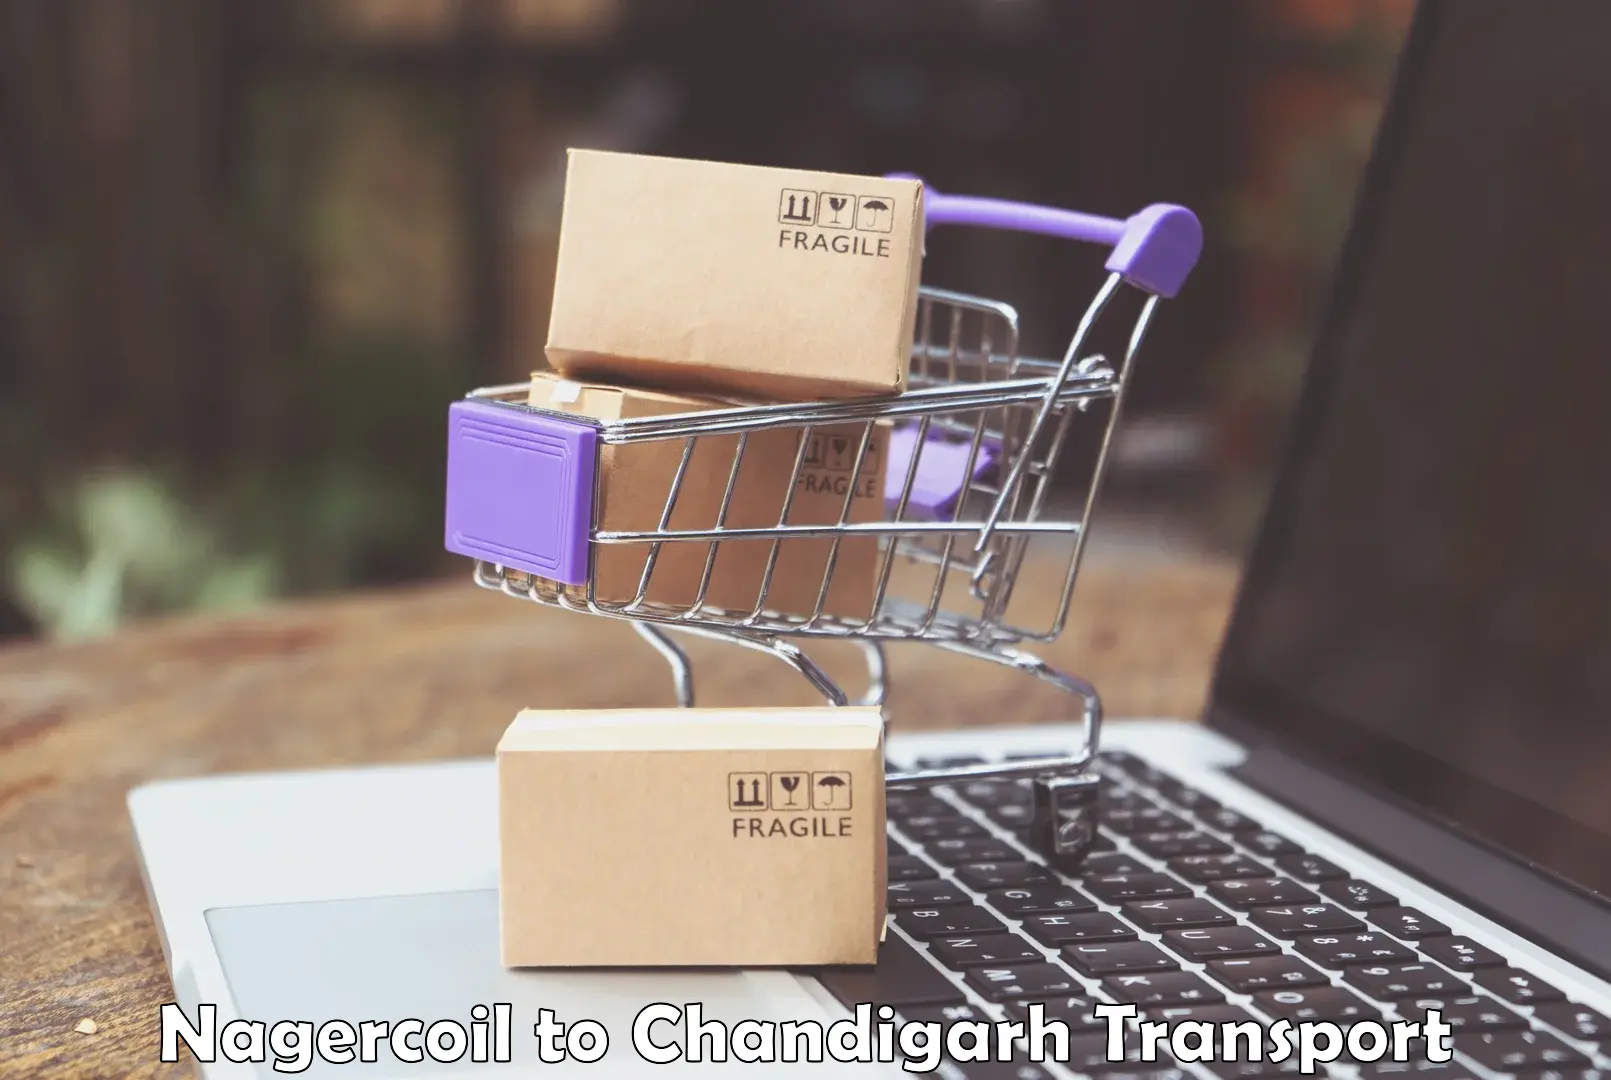 Parcel transport services Nagercoil to Chandigarh